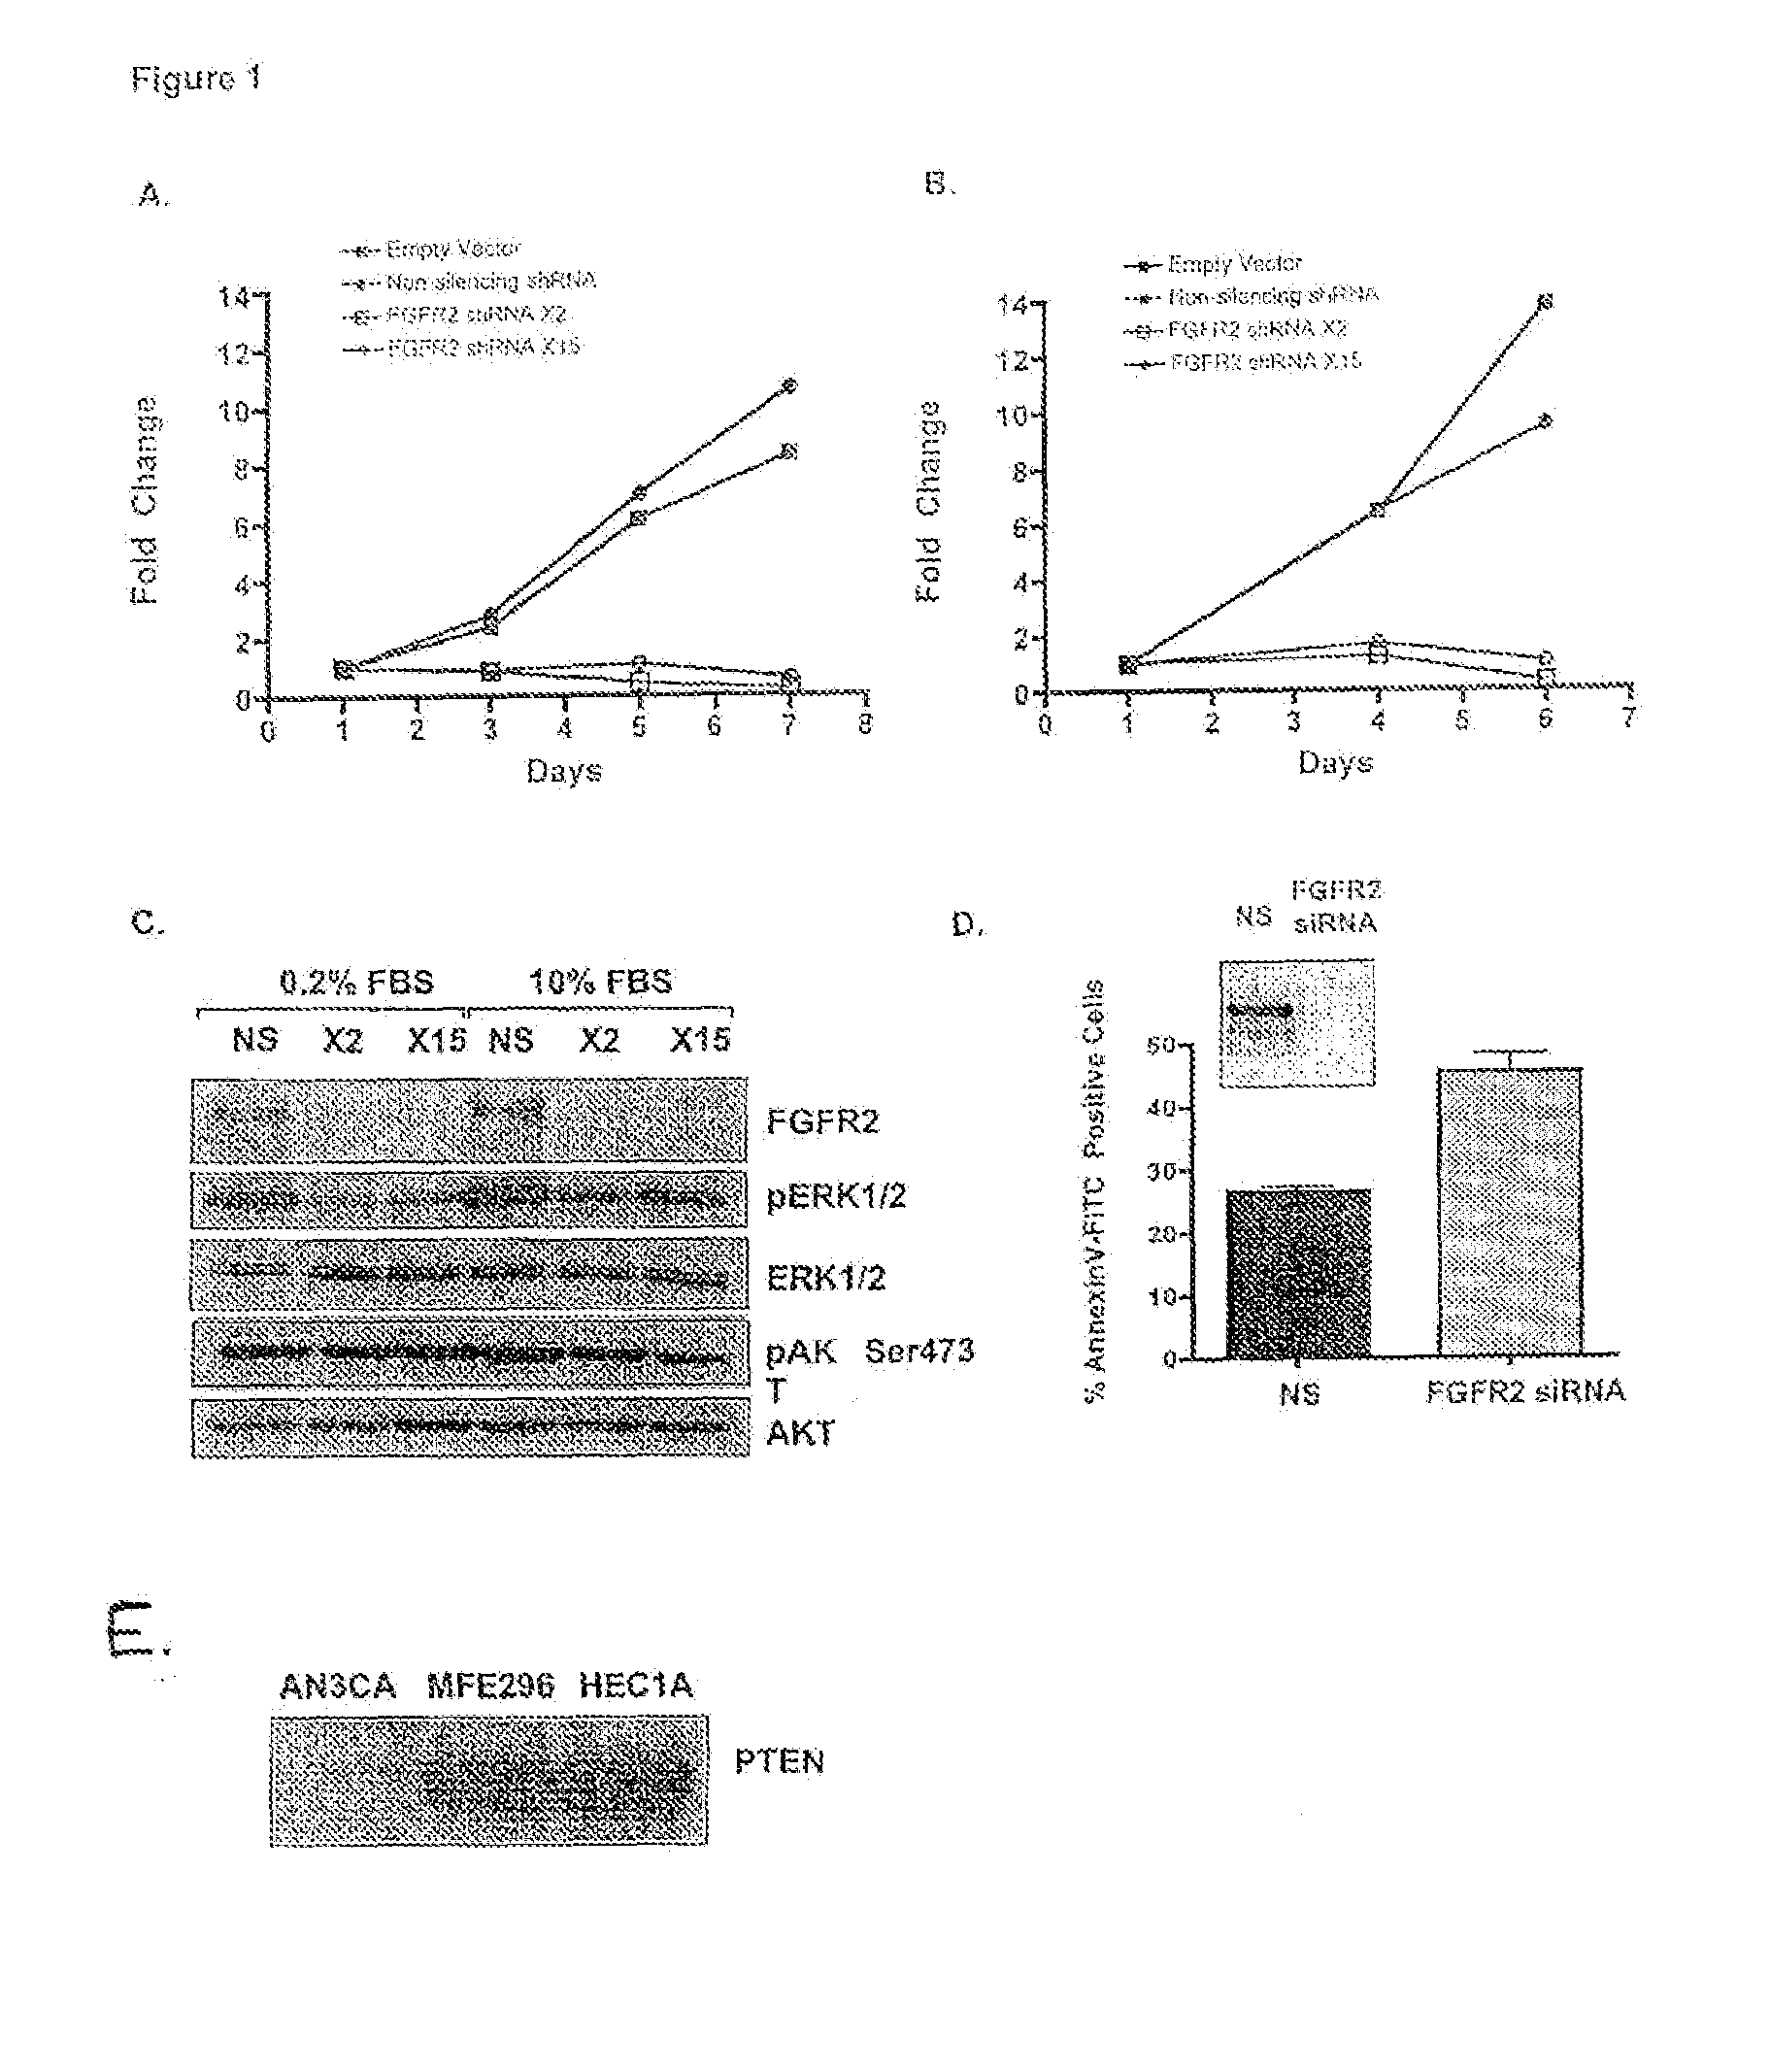 Method of diagnosing, classifying and treating endometrial cancer and precancer